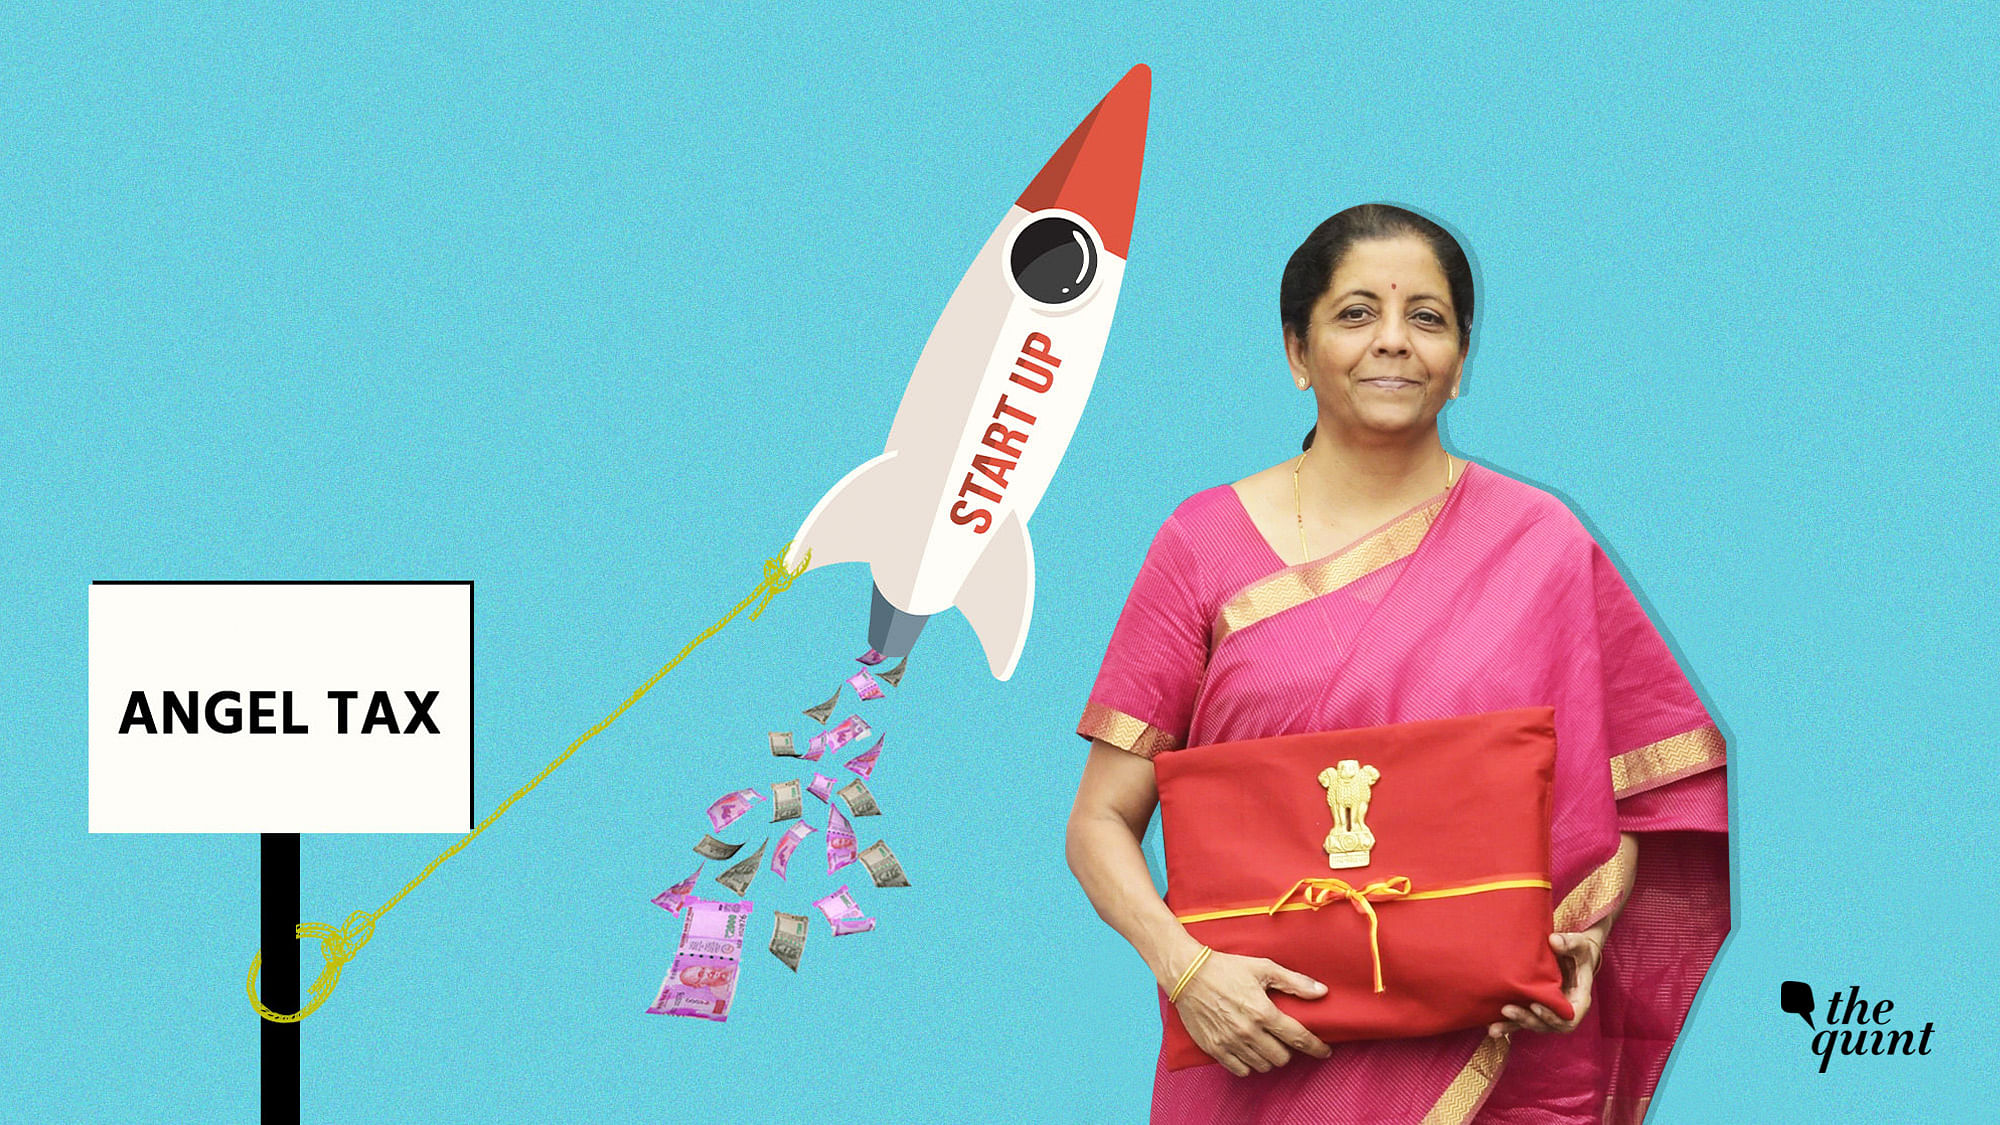 Finance Minister Nirmala Sitharaman announced many measures to ease the ‘angel tax’ woes of startups.